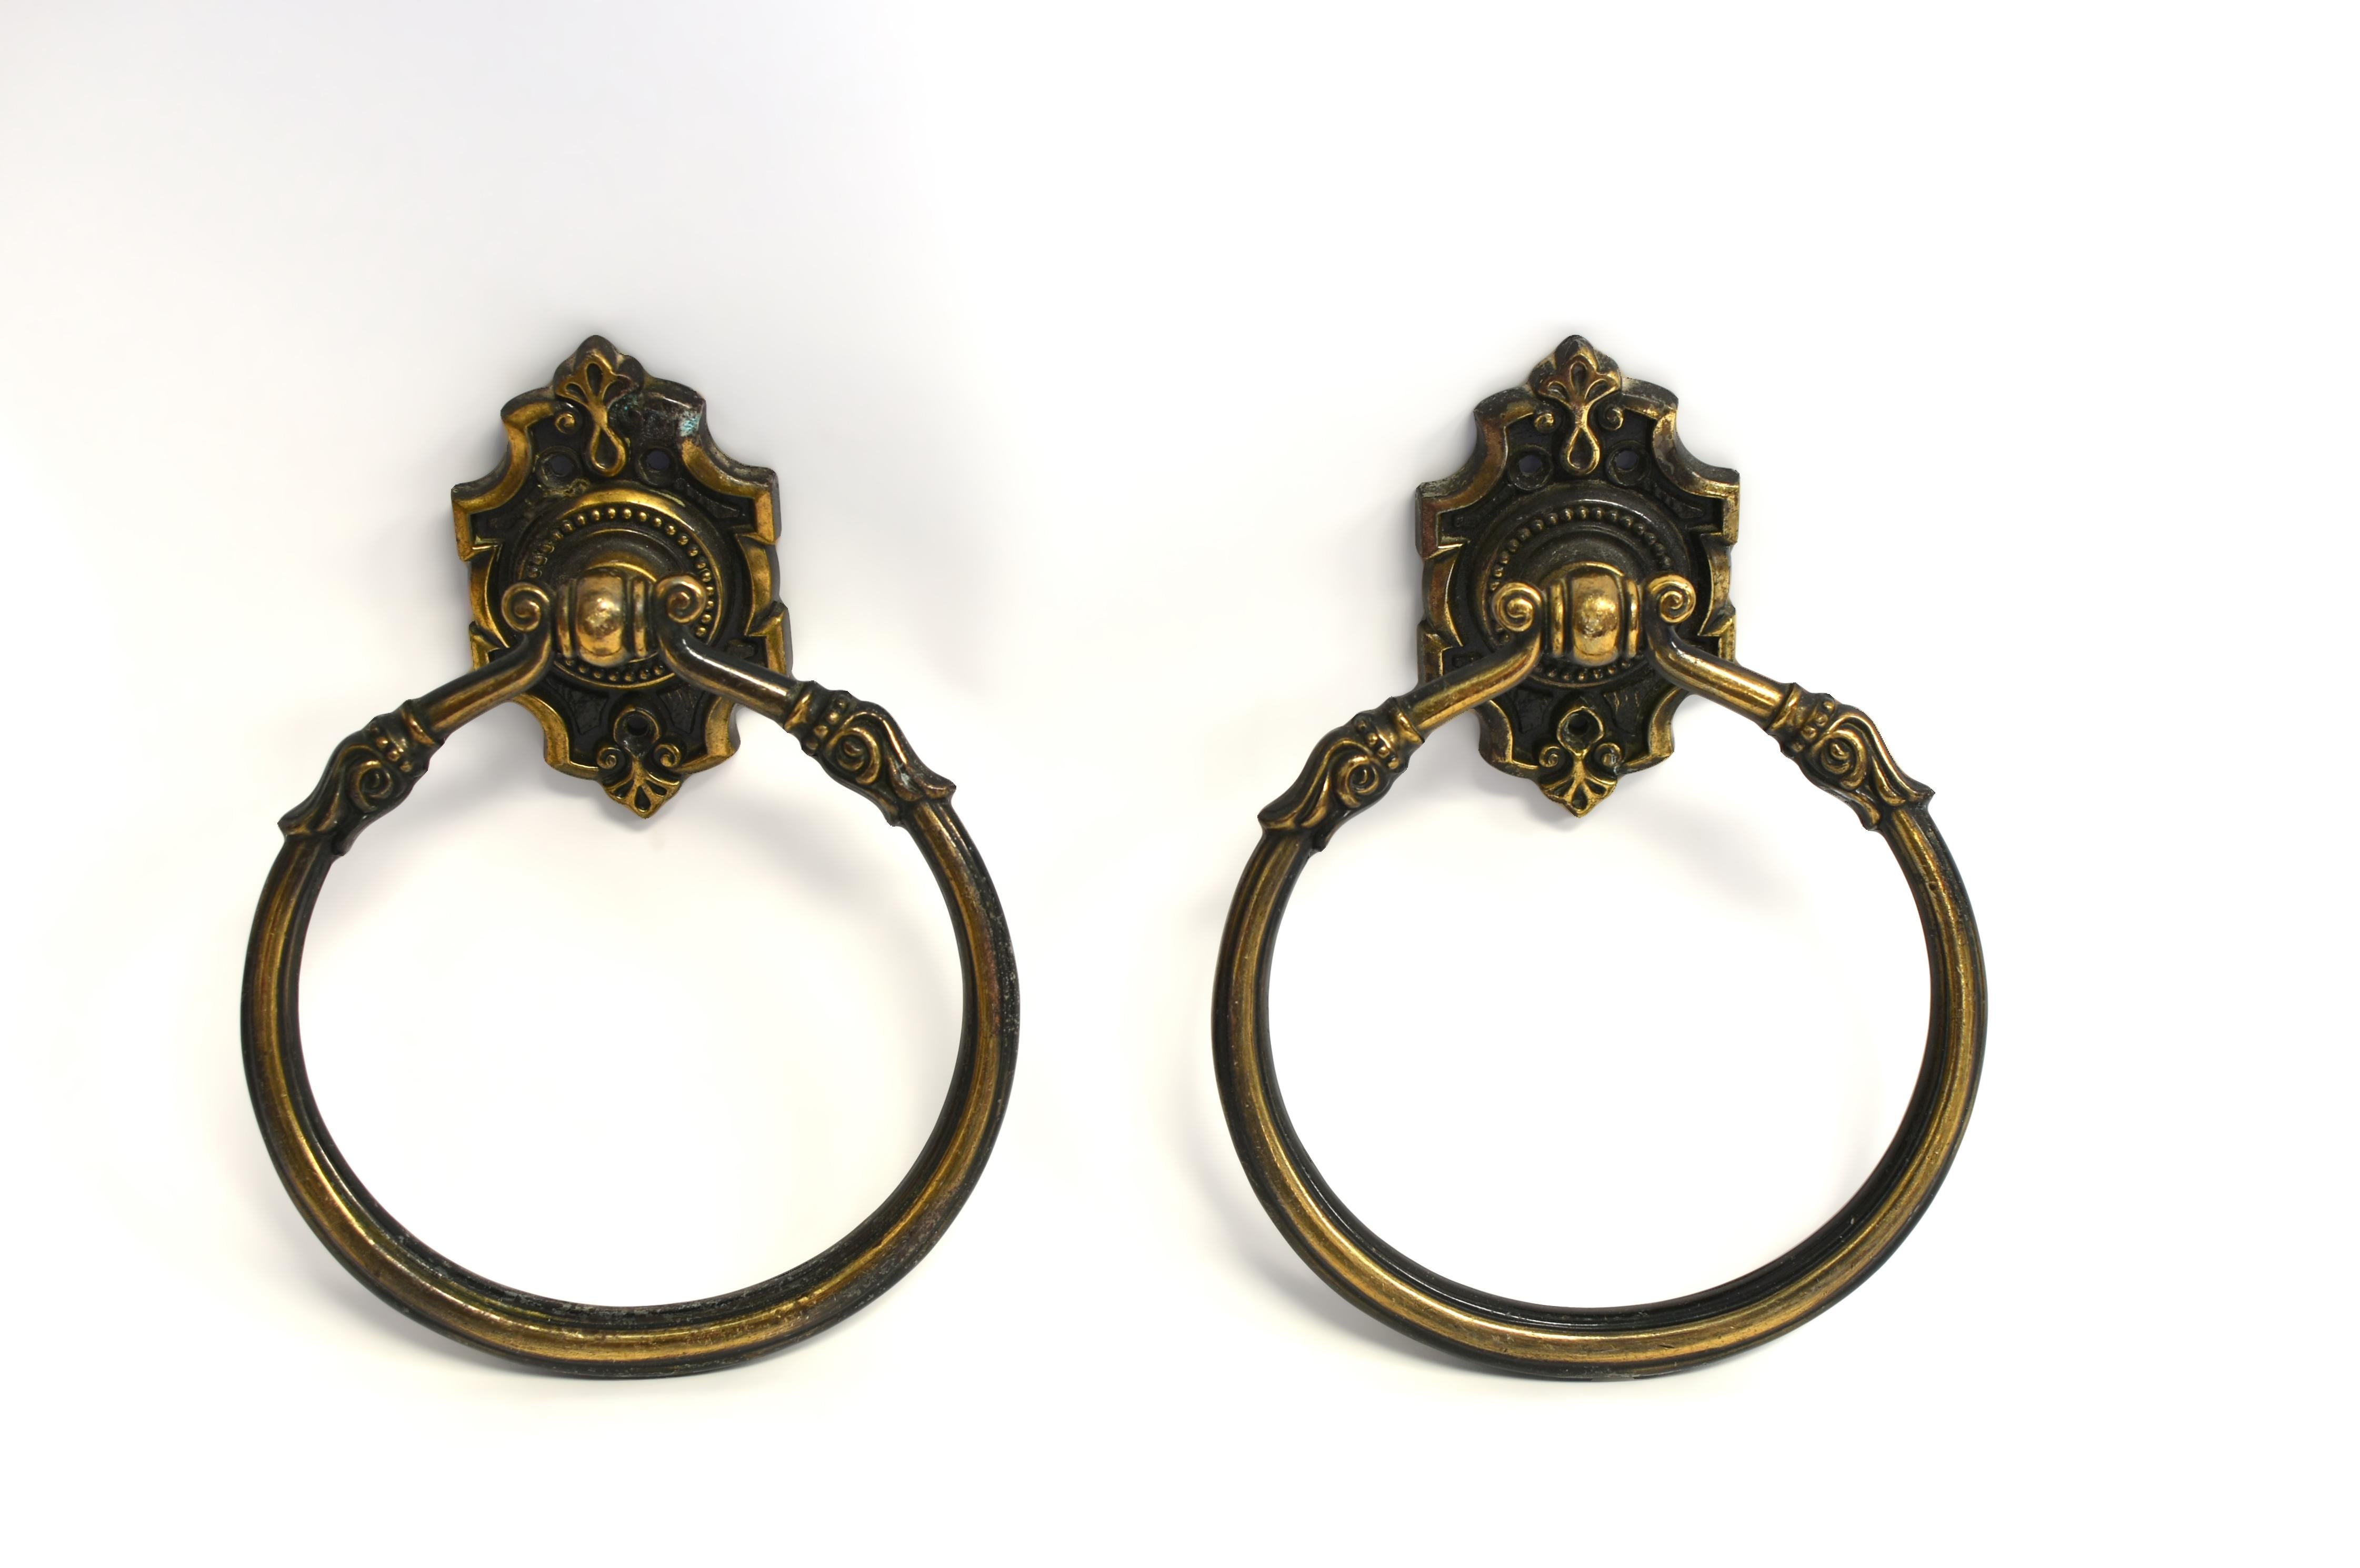 The large art nouveau style rings with elegant tulips, surmounted by symmetrical knobs, mounted on a chamfered plate with beaded medallions and florals. These beautiful pieces can be used on doors as handles, perhaps not as knockers since they are